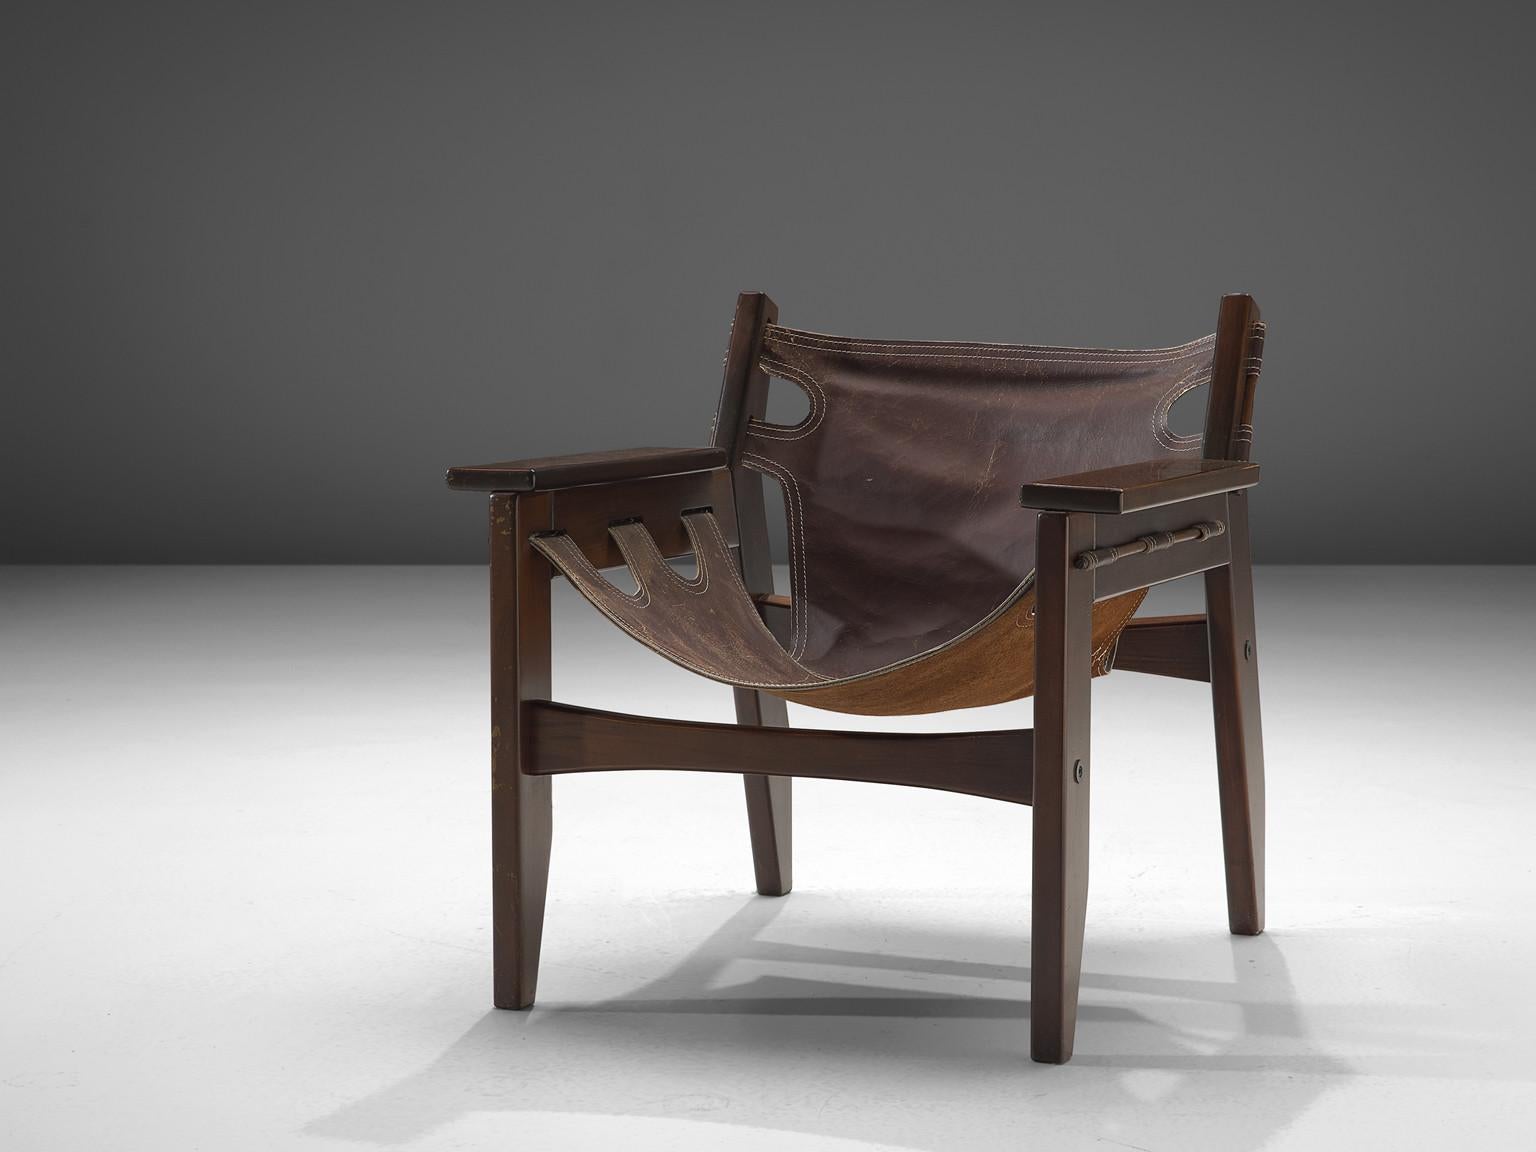 Sergio Rodrigues for OCA, 'Kilin' armchair, hardwood, leather, Brazil, 1973

'Kilin' easy chair in hardwood and brown leather designed by Sergio Rodrigues in 1973. This chair has a sturdy appearance and is designed with high attention to detail.